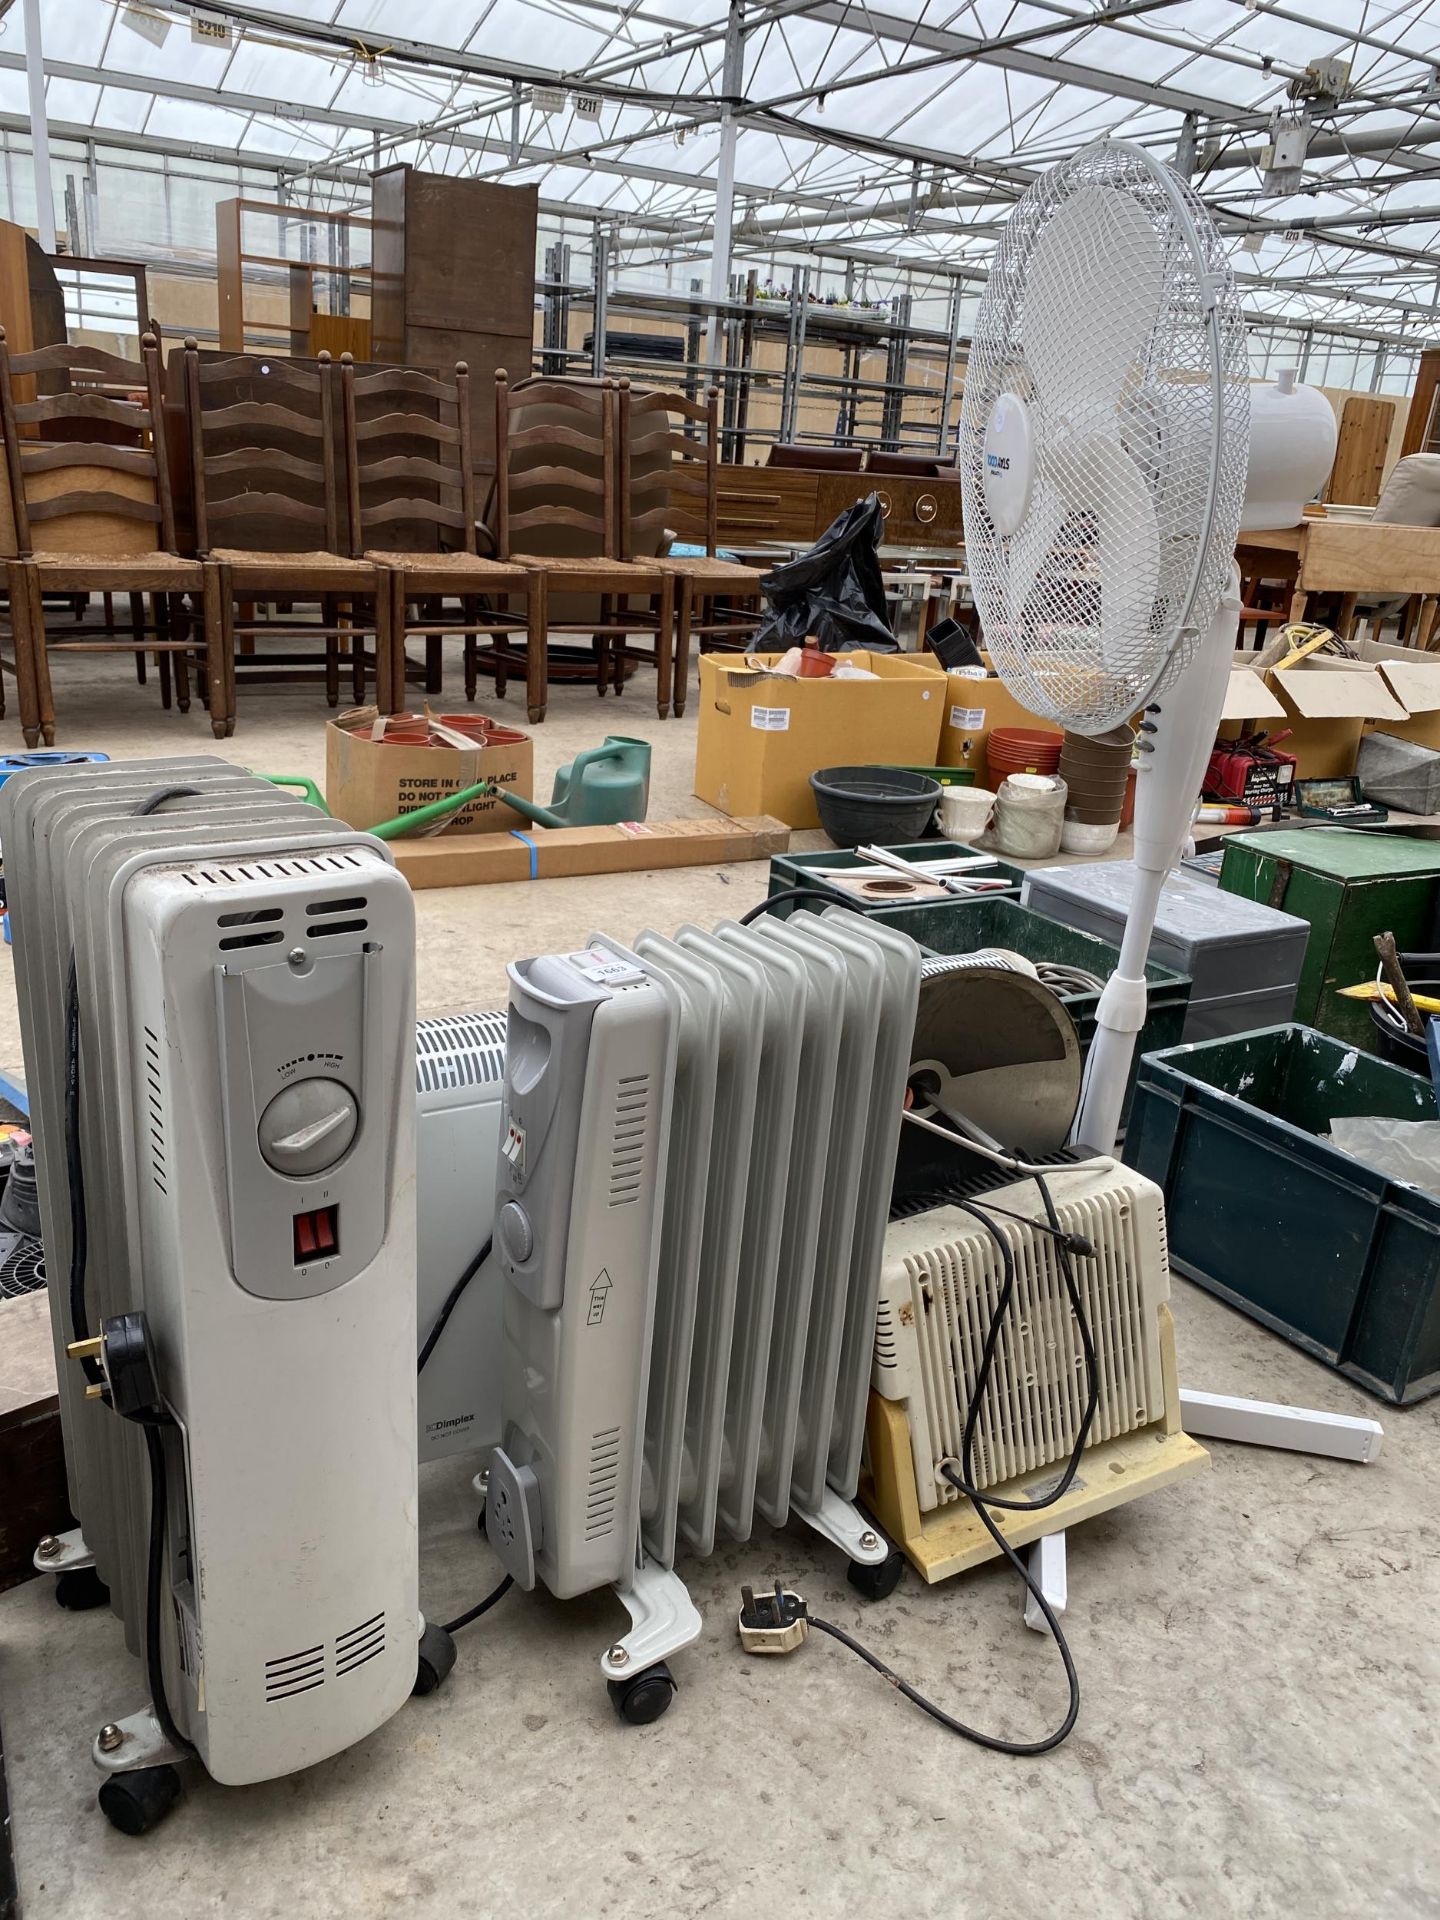 VARIOUS ELECTRIC HEATERS AND A FLOOR FAN ETC